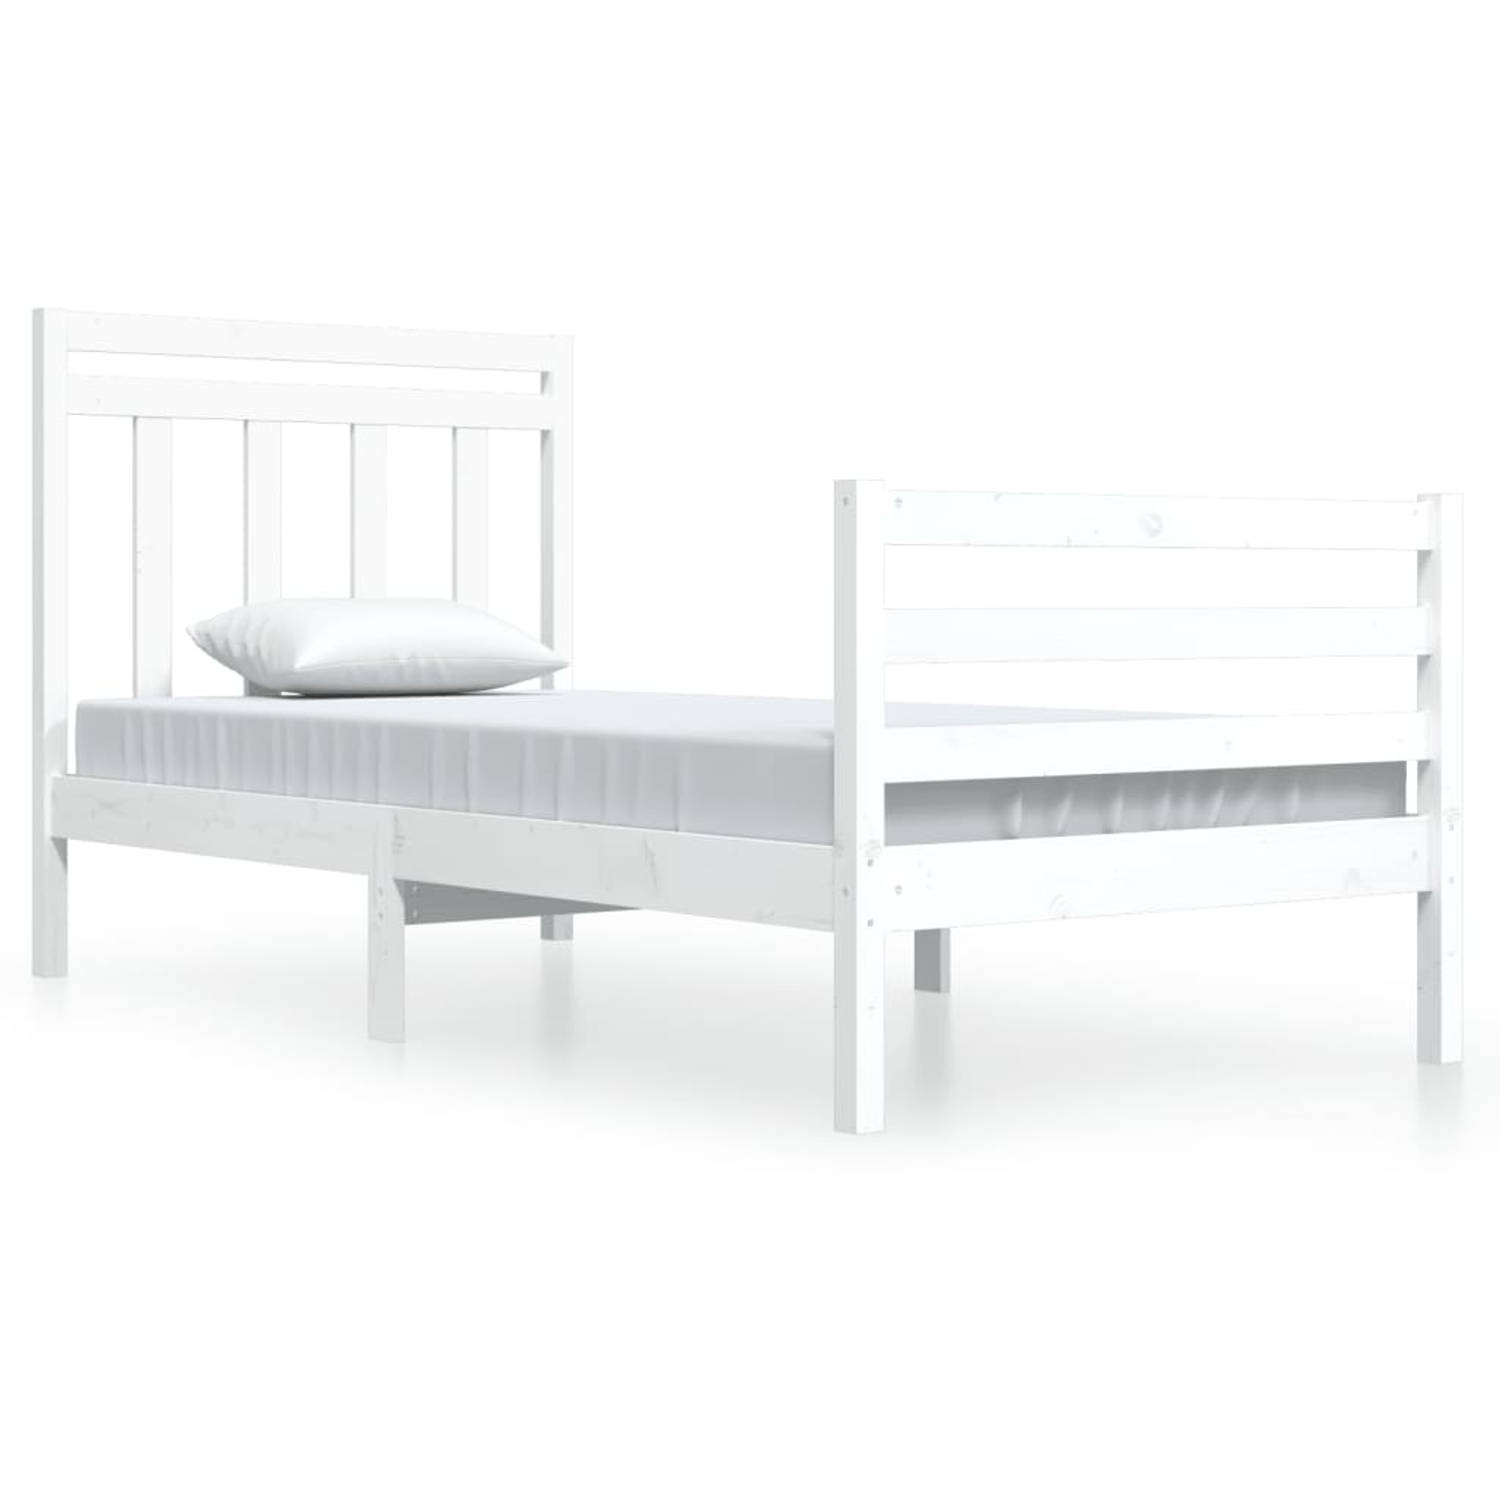 The Living Store Bedframe massief hout wit 90x200 cm - Bedframe - Bedframes - Eenpersoonsbed - Bed - Bedombouw - Ledikant - Houten Bedframe - Eenpersoonsbedden - Bedden - Bedombouw